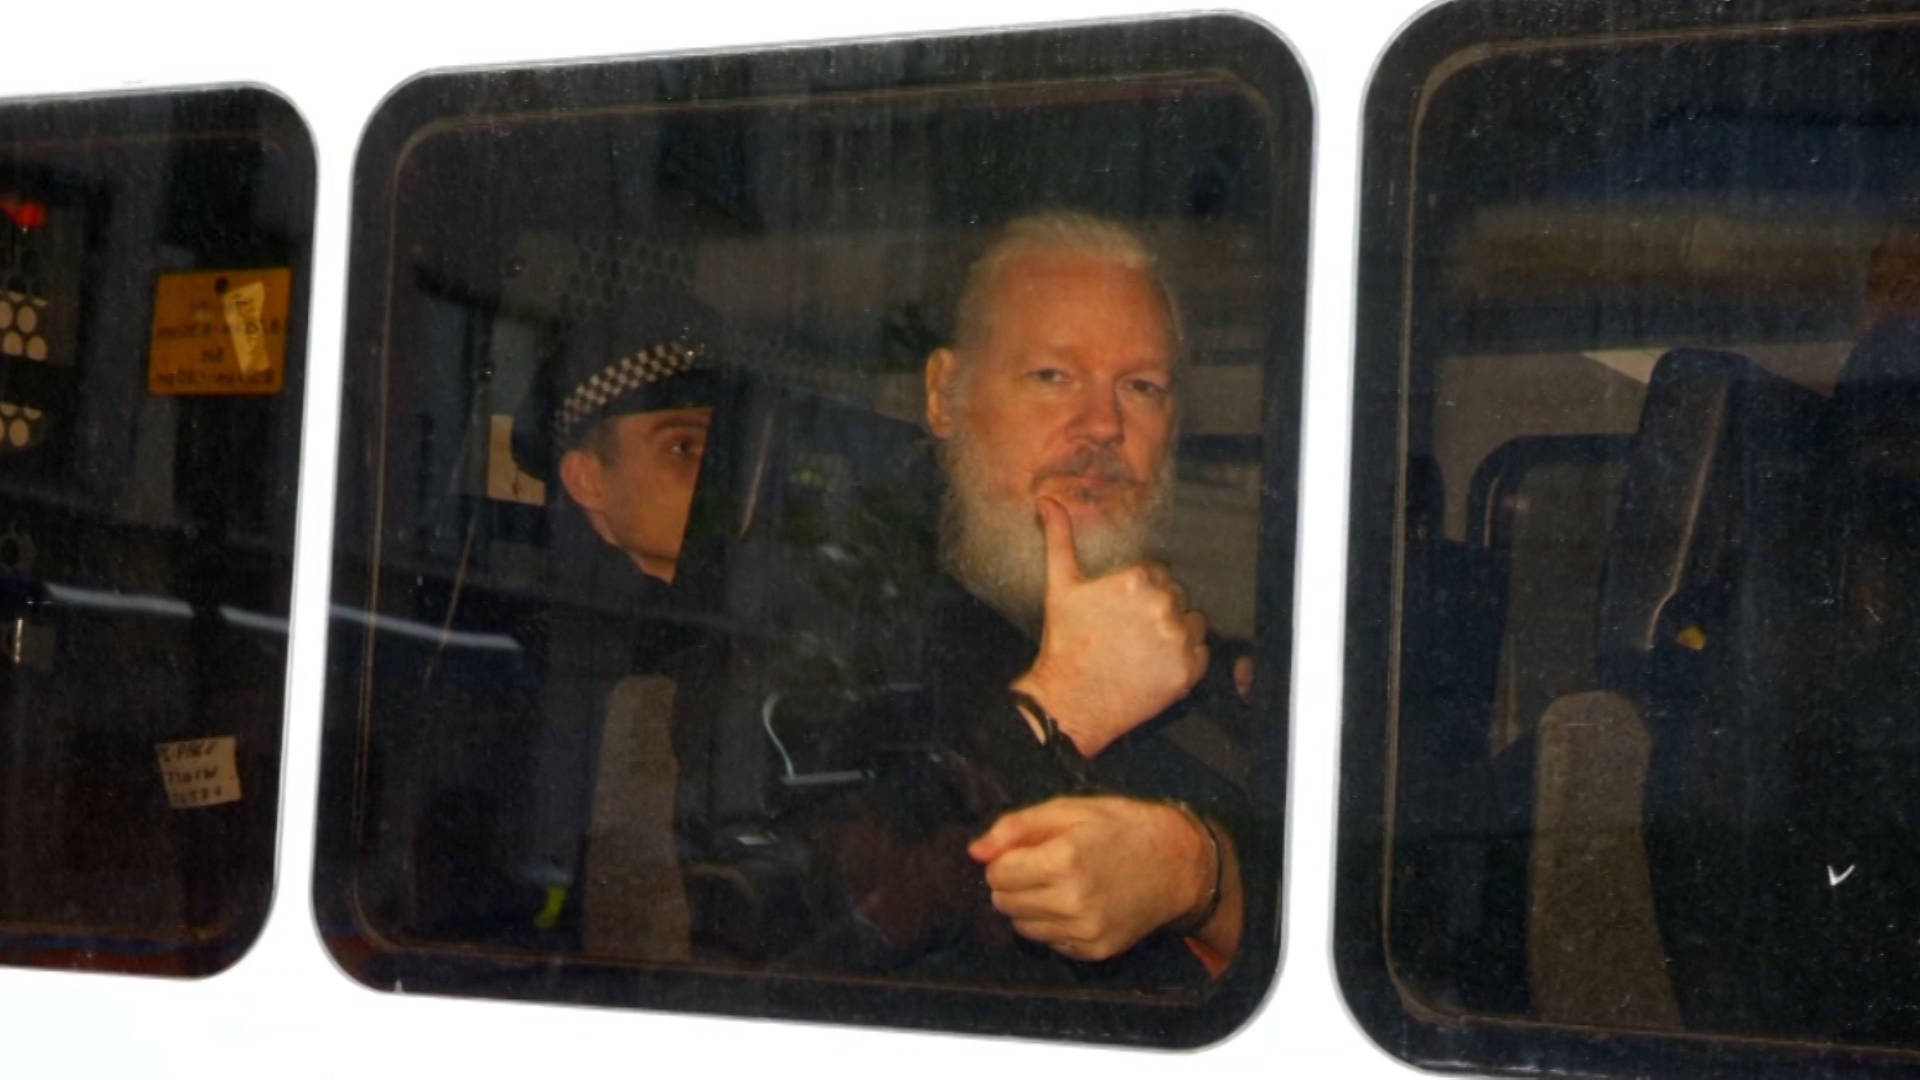 U.K. Court Will Allow Extradition of Julian Assange to U.S. to Face Espionage Charges